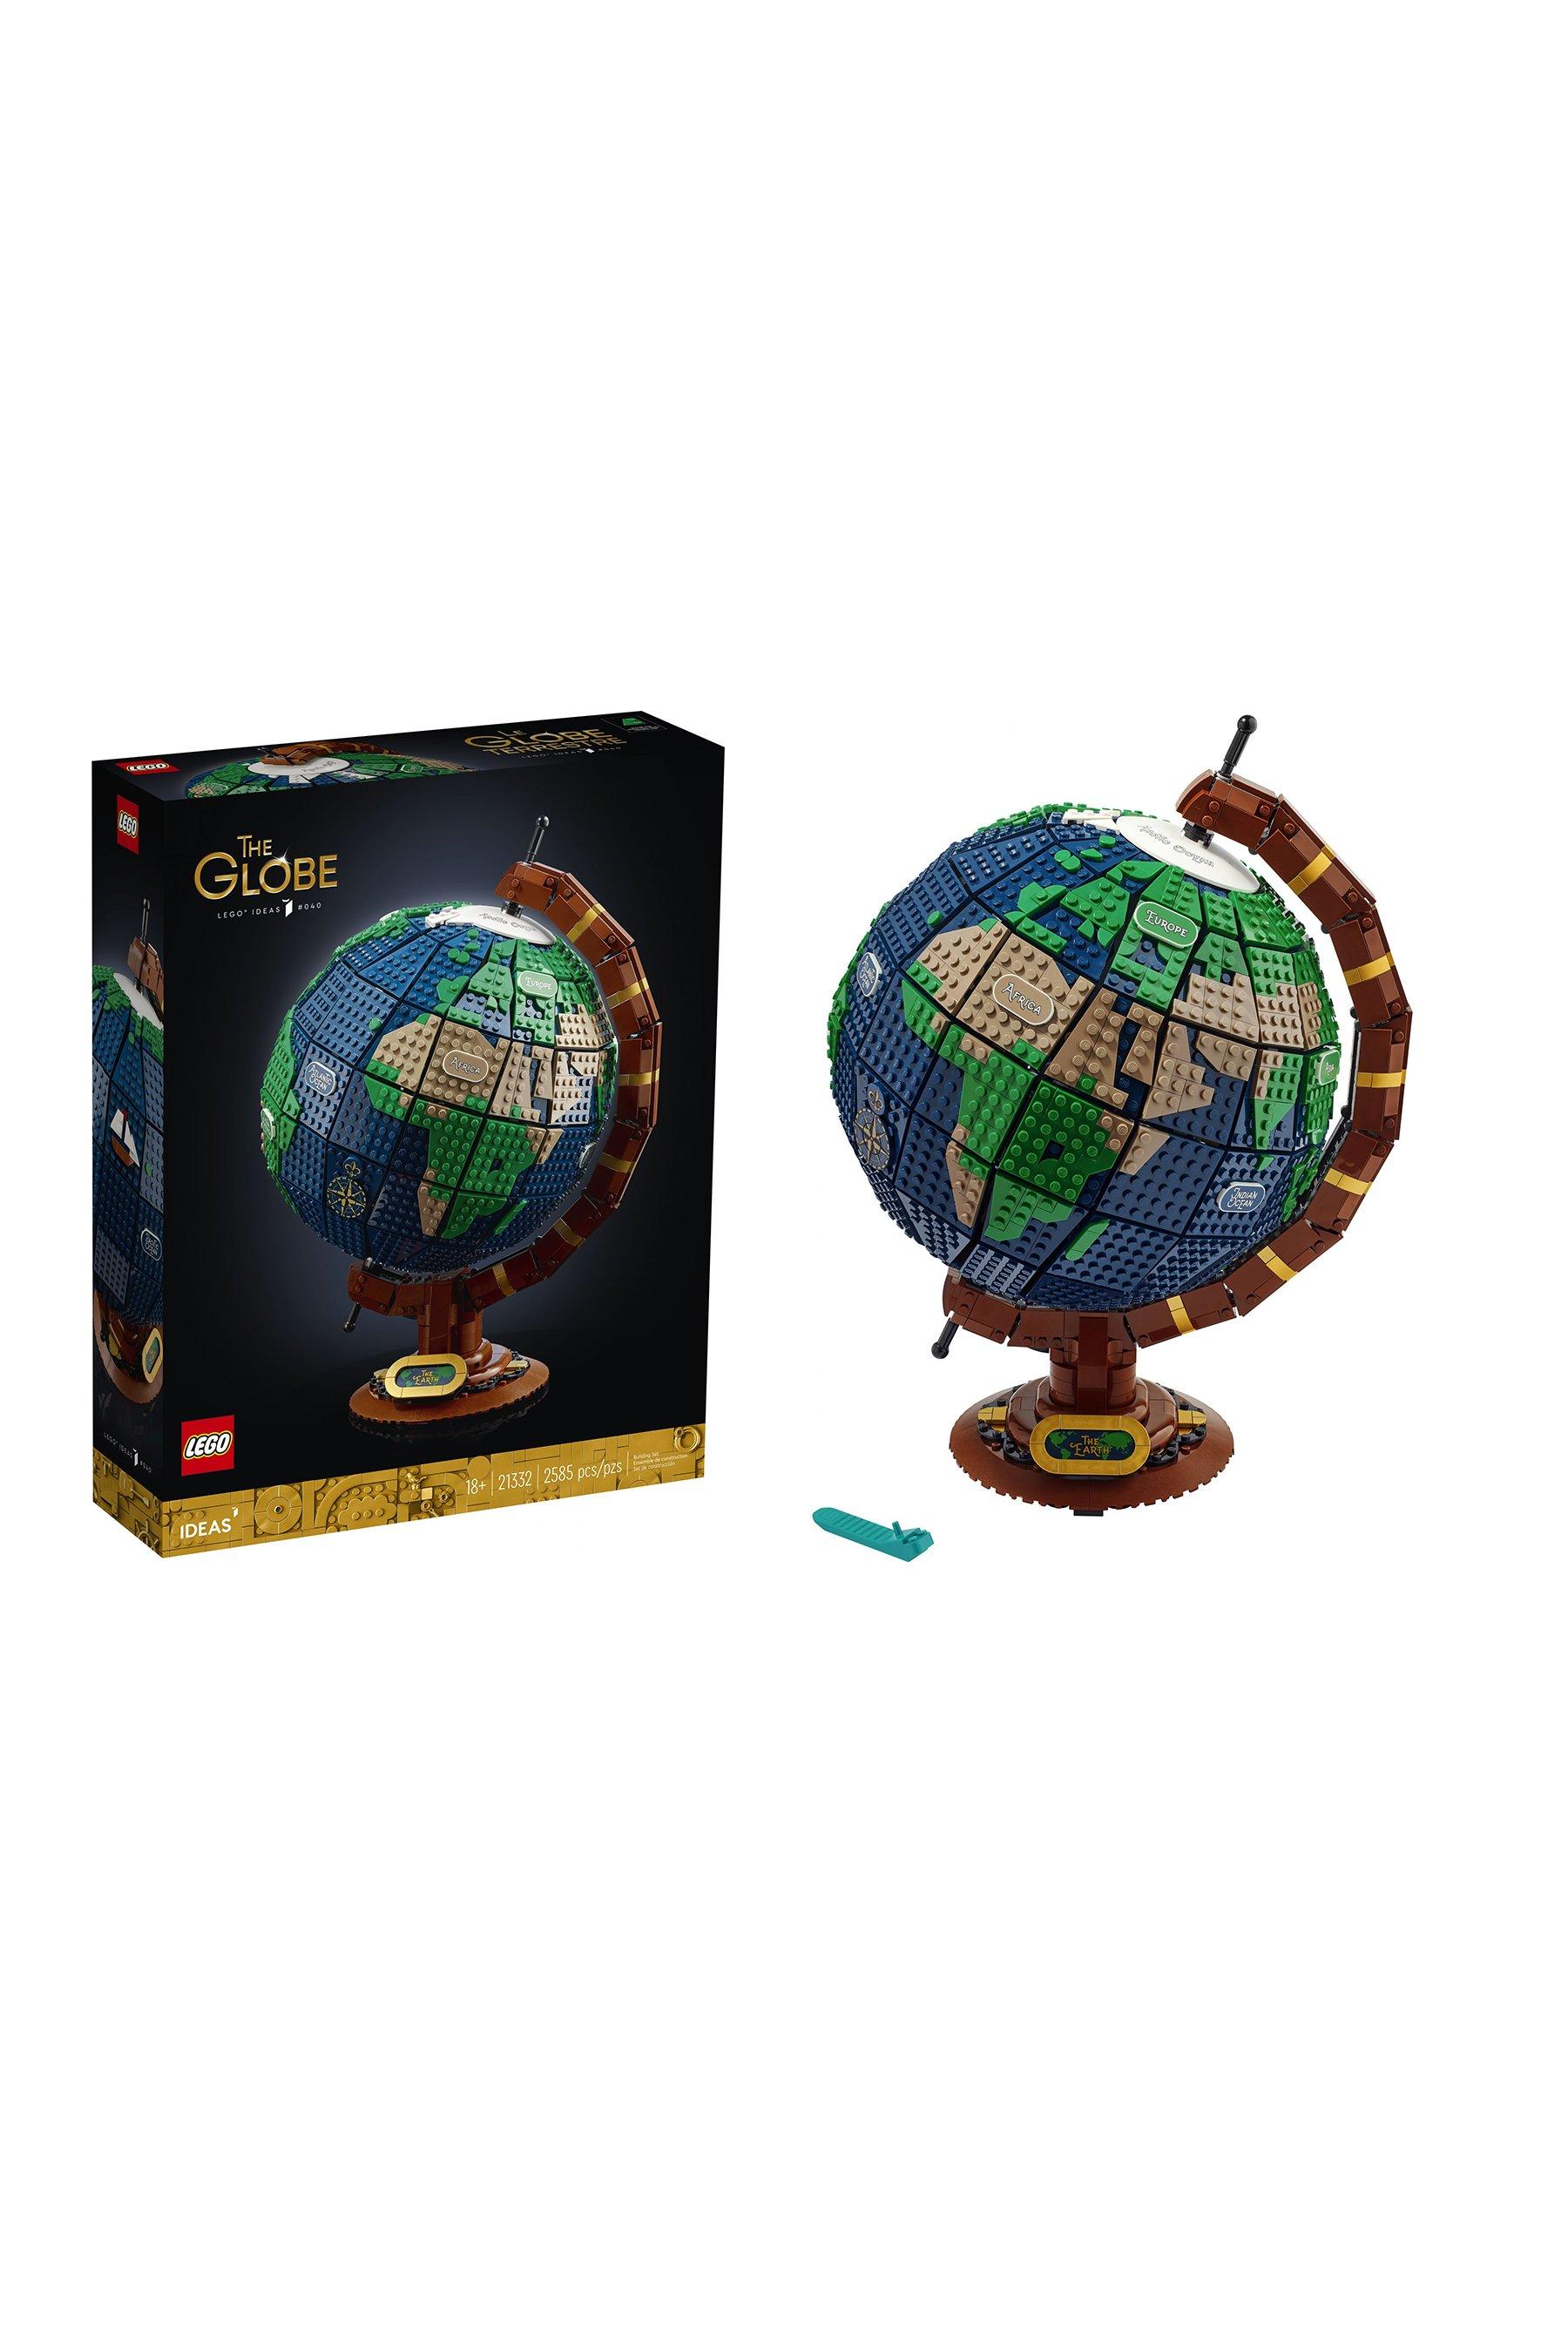 Everything you need to know about LEGO 21332 The Globe